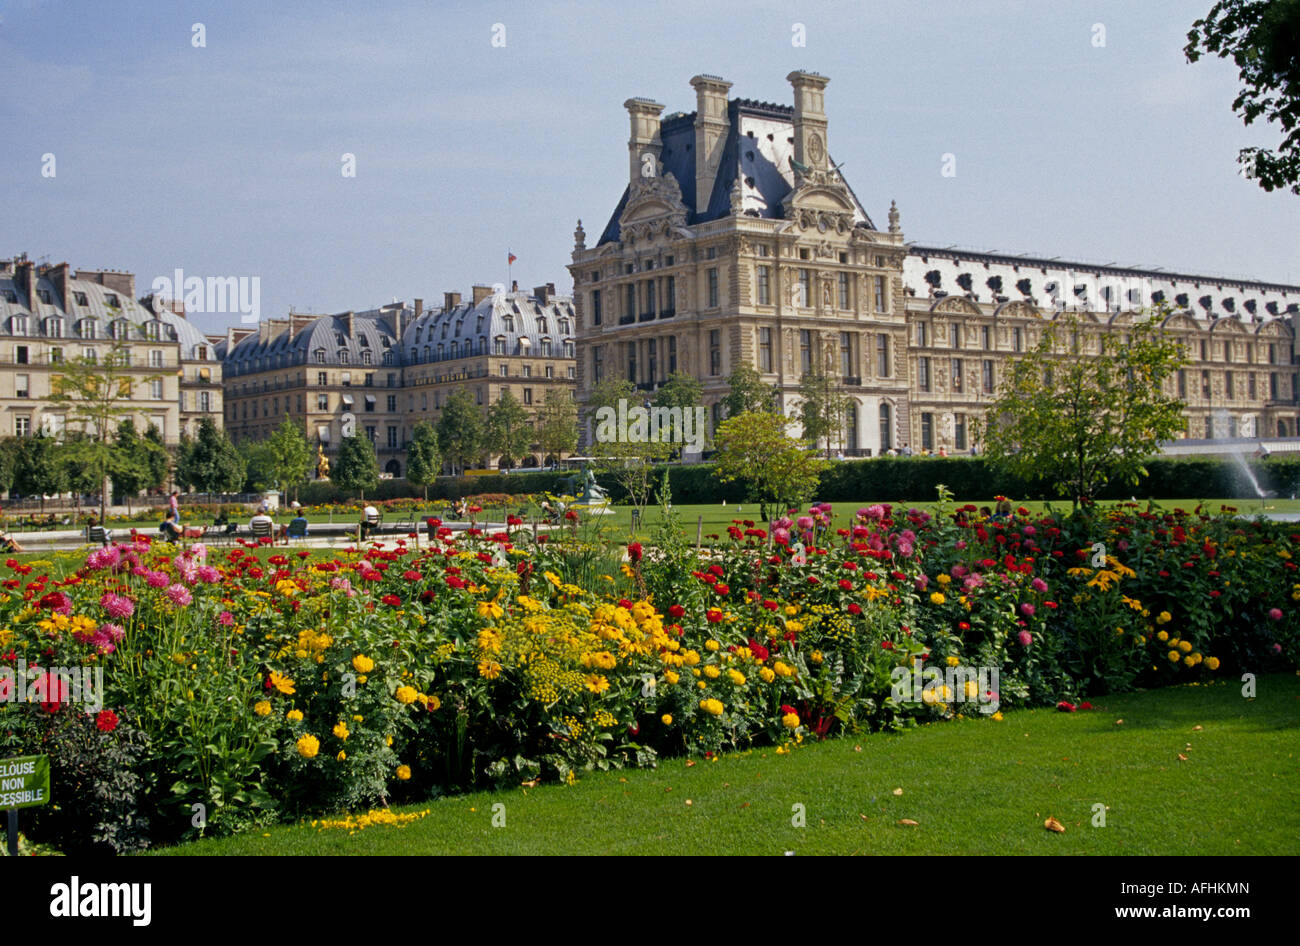 A view of the Louvre Museum and Tuileries Gardens along the Seine River in downtown Paris Stock Photo